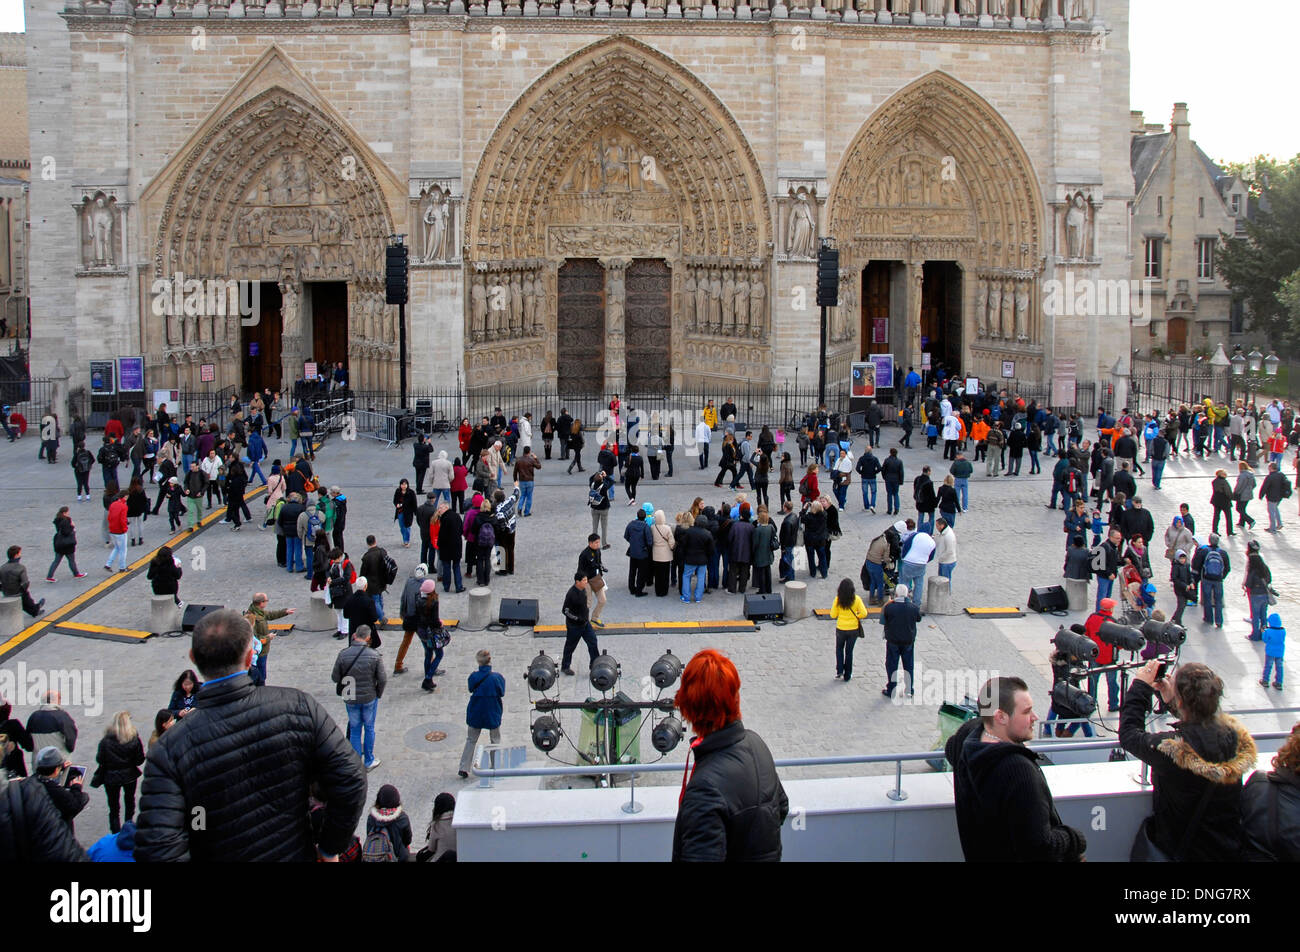 Crowds watching entertainers in front of Notre Dame cathedral, Paris, France Stock Photo